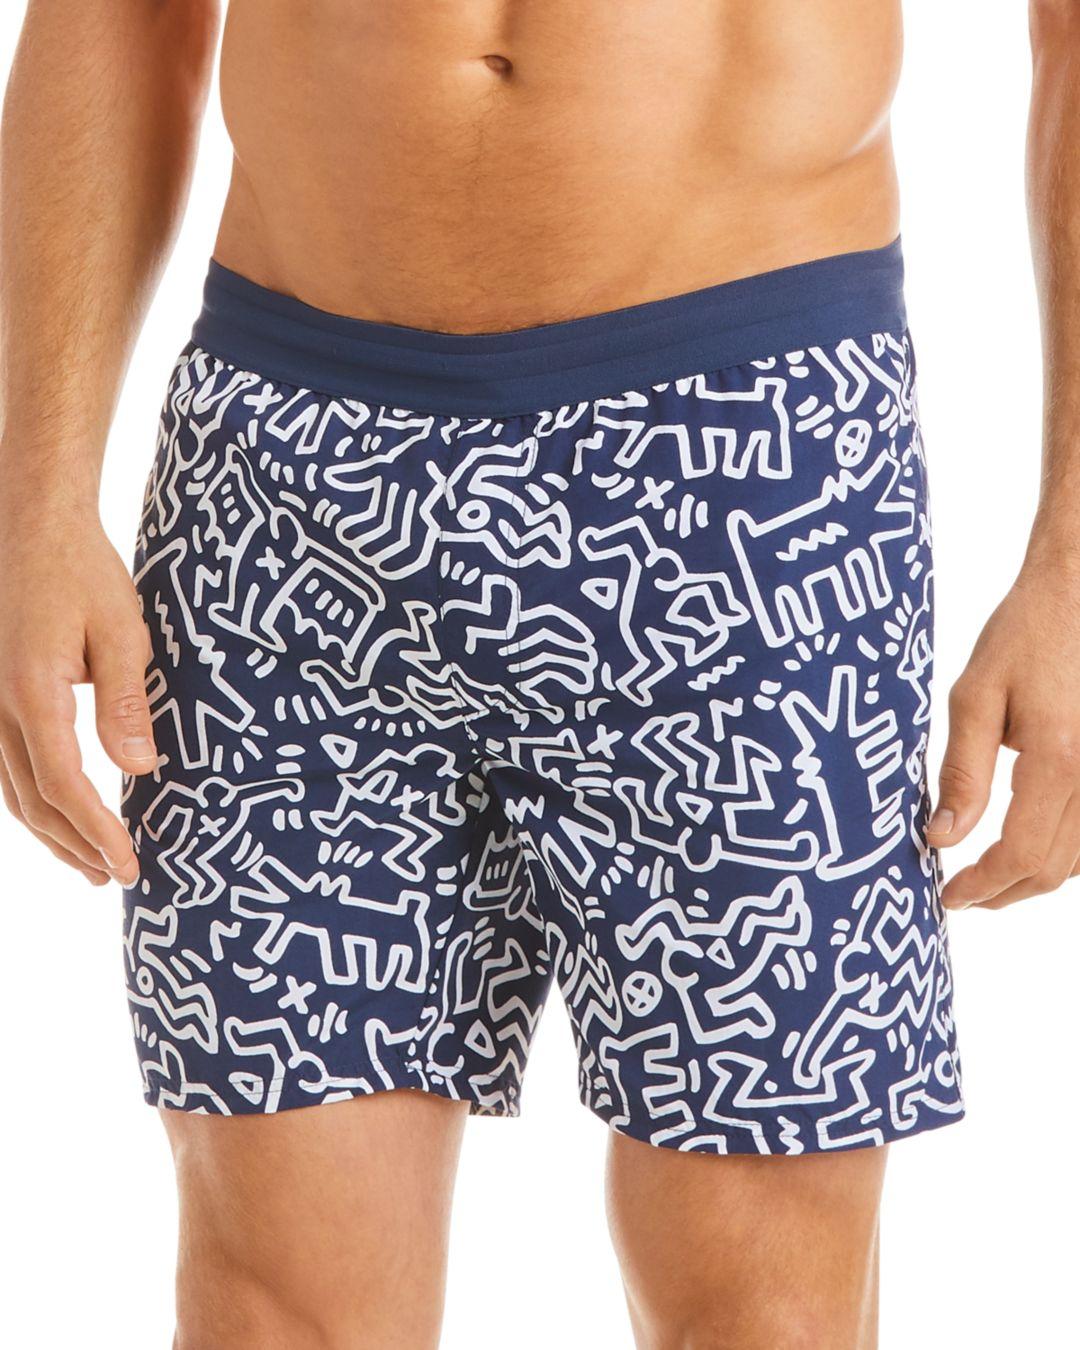 Lacoste X Keith Haring Printed Swim Trunks in Navy (Blue) for Men - Lyst